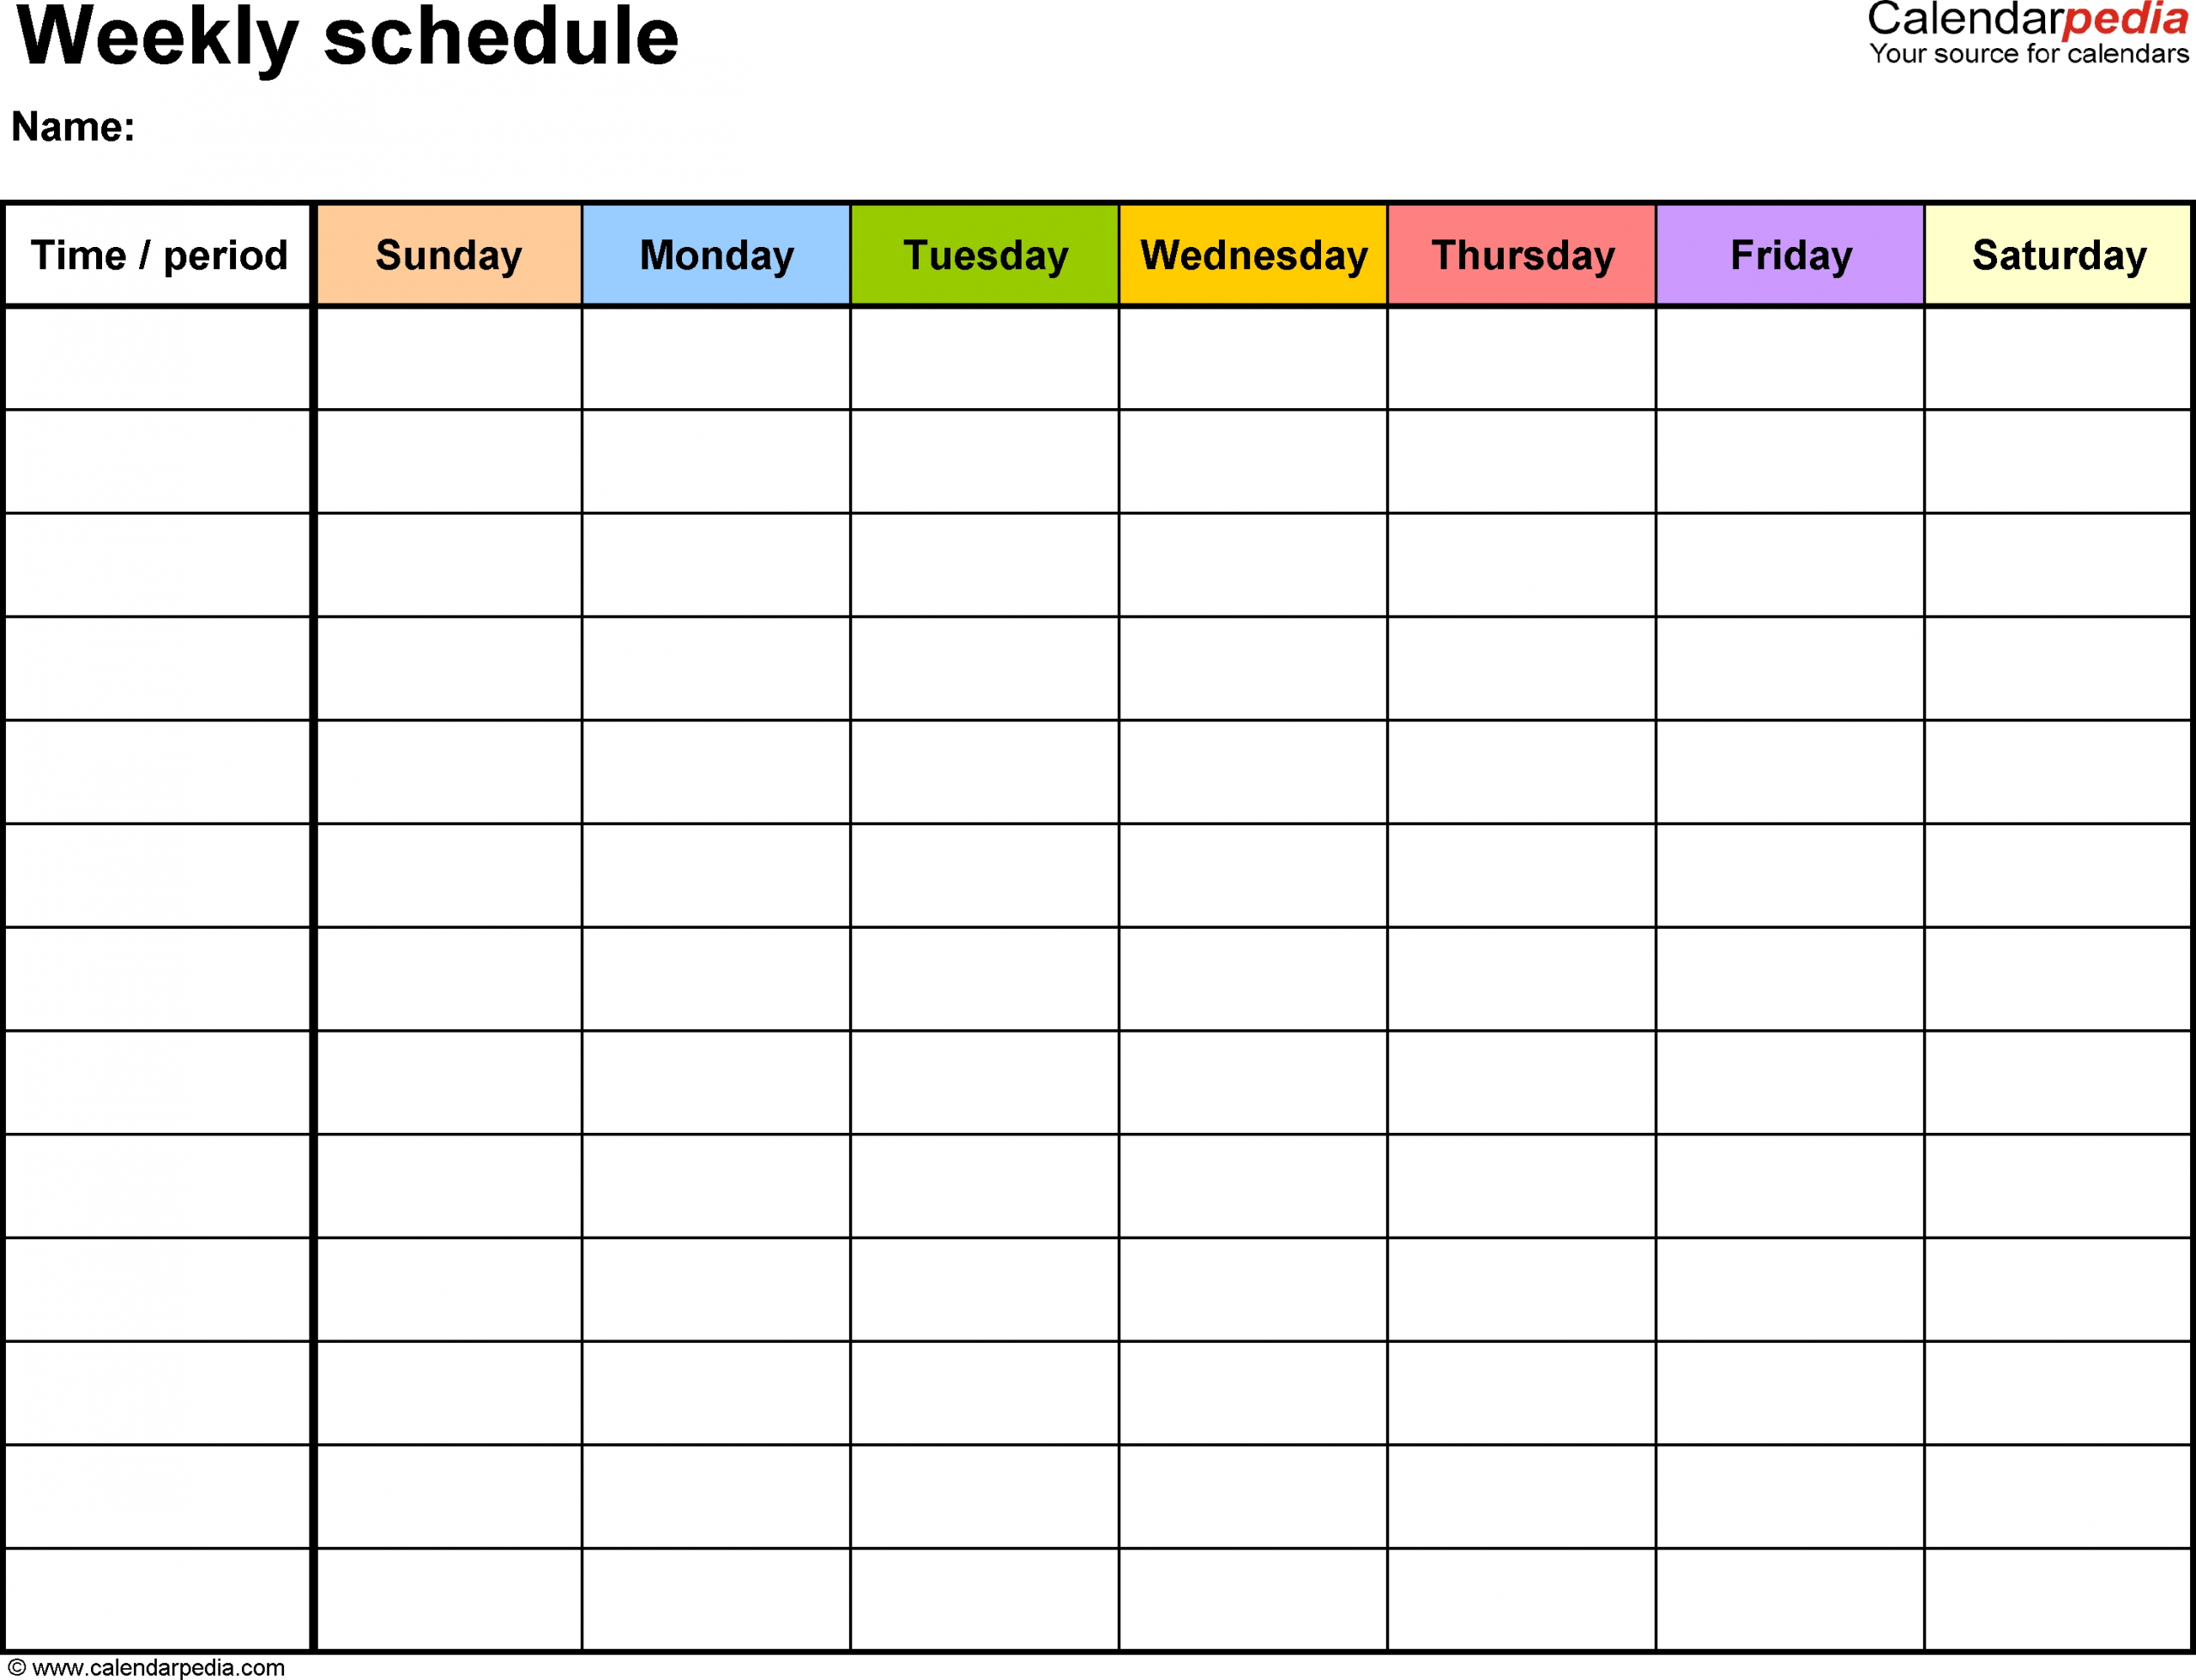 Weekly Schedule Template For Pdf Version 13: Landscape, 1